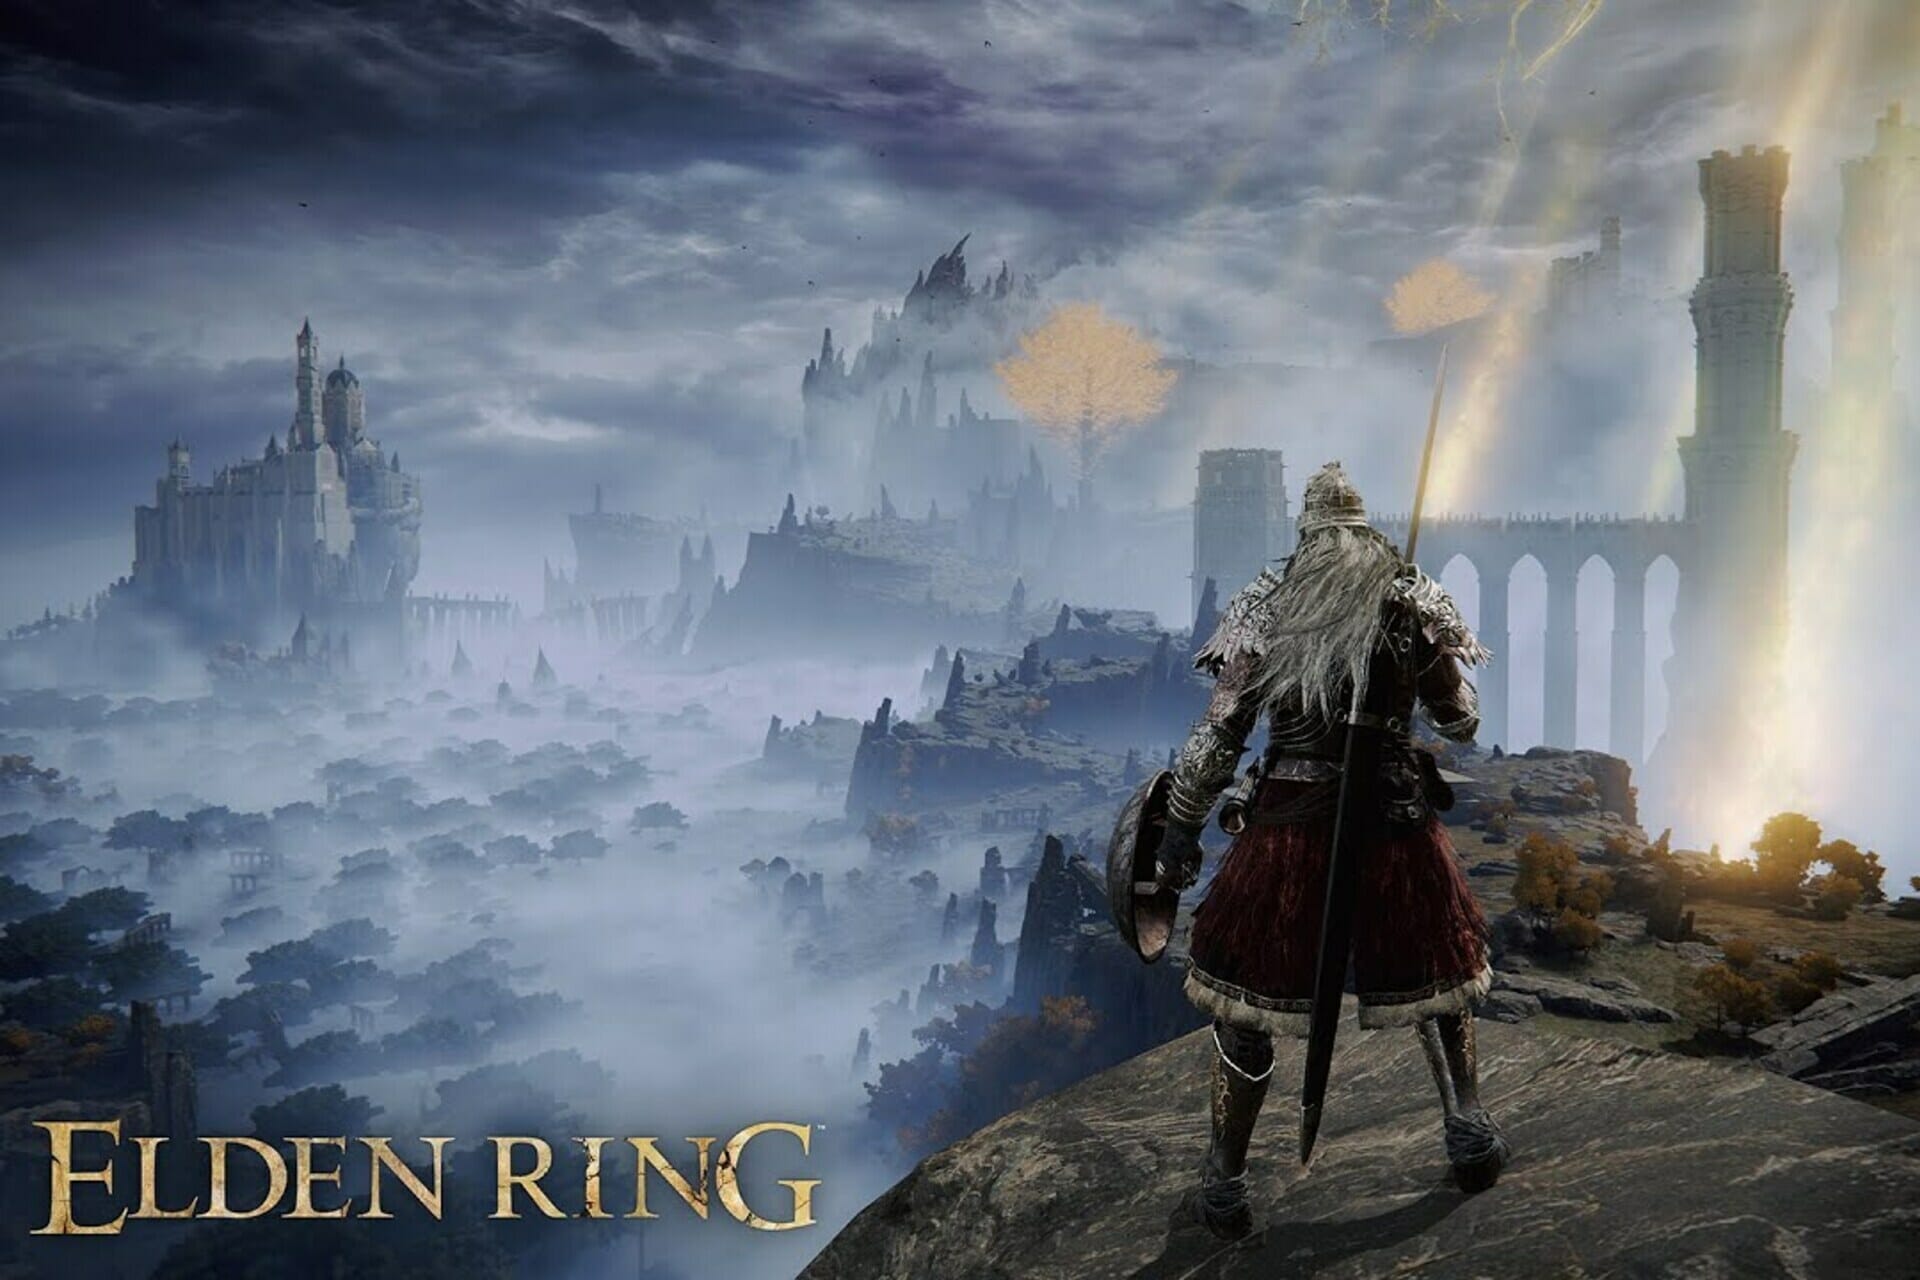 Elden Ring failed to acquire parental control information